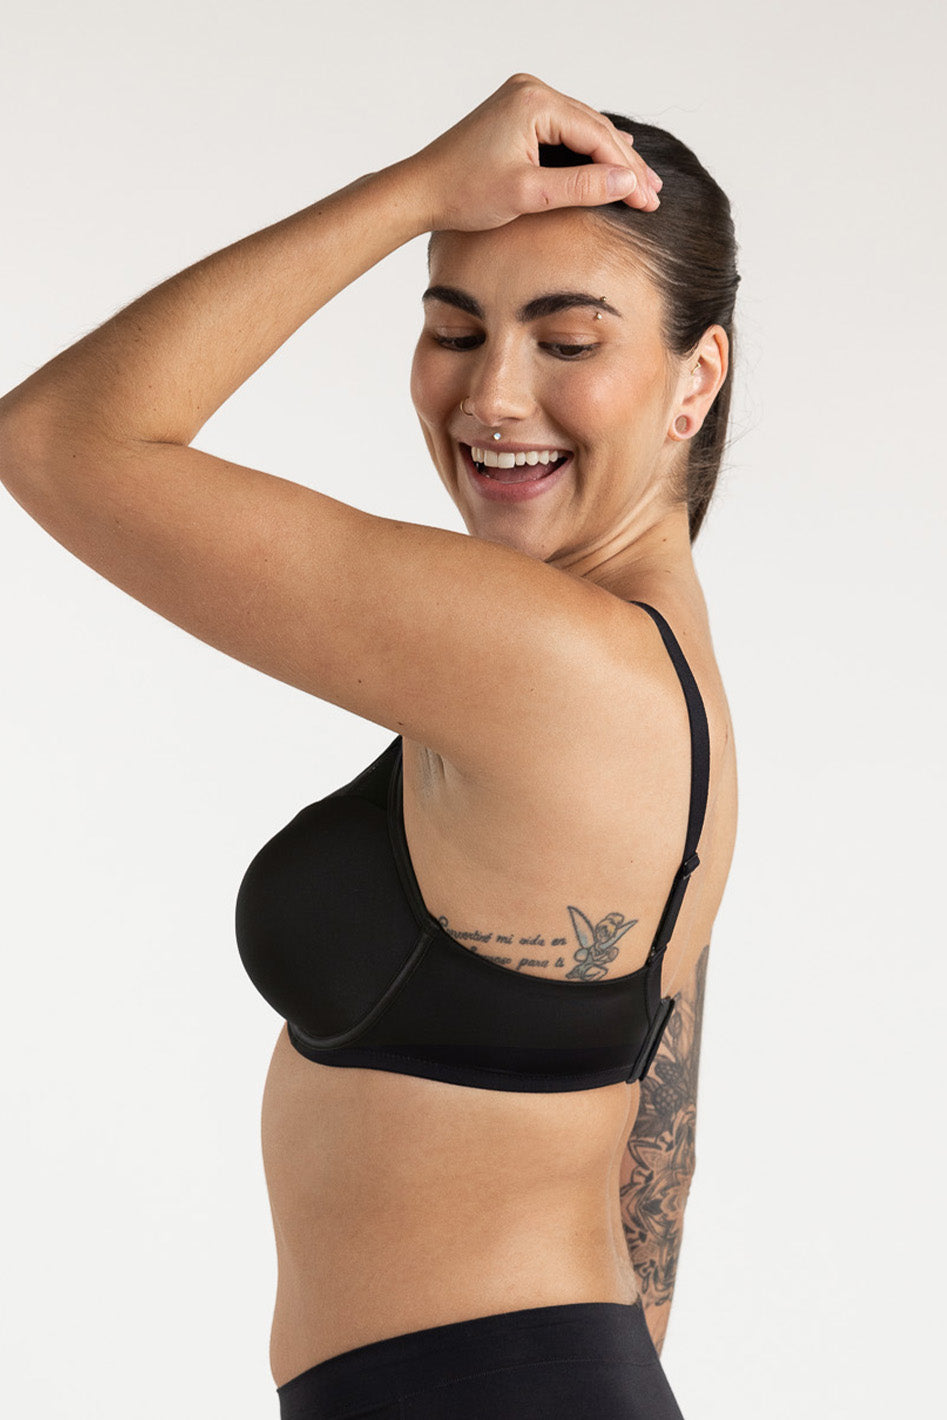 Small band and large cup besties, check in! These @Harper Wilde bras a